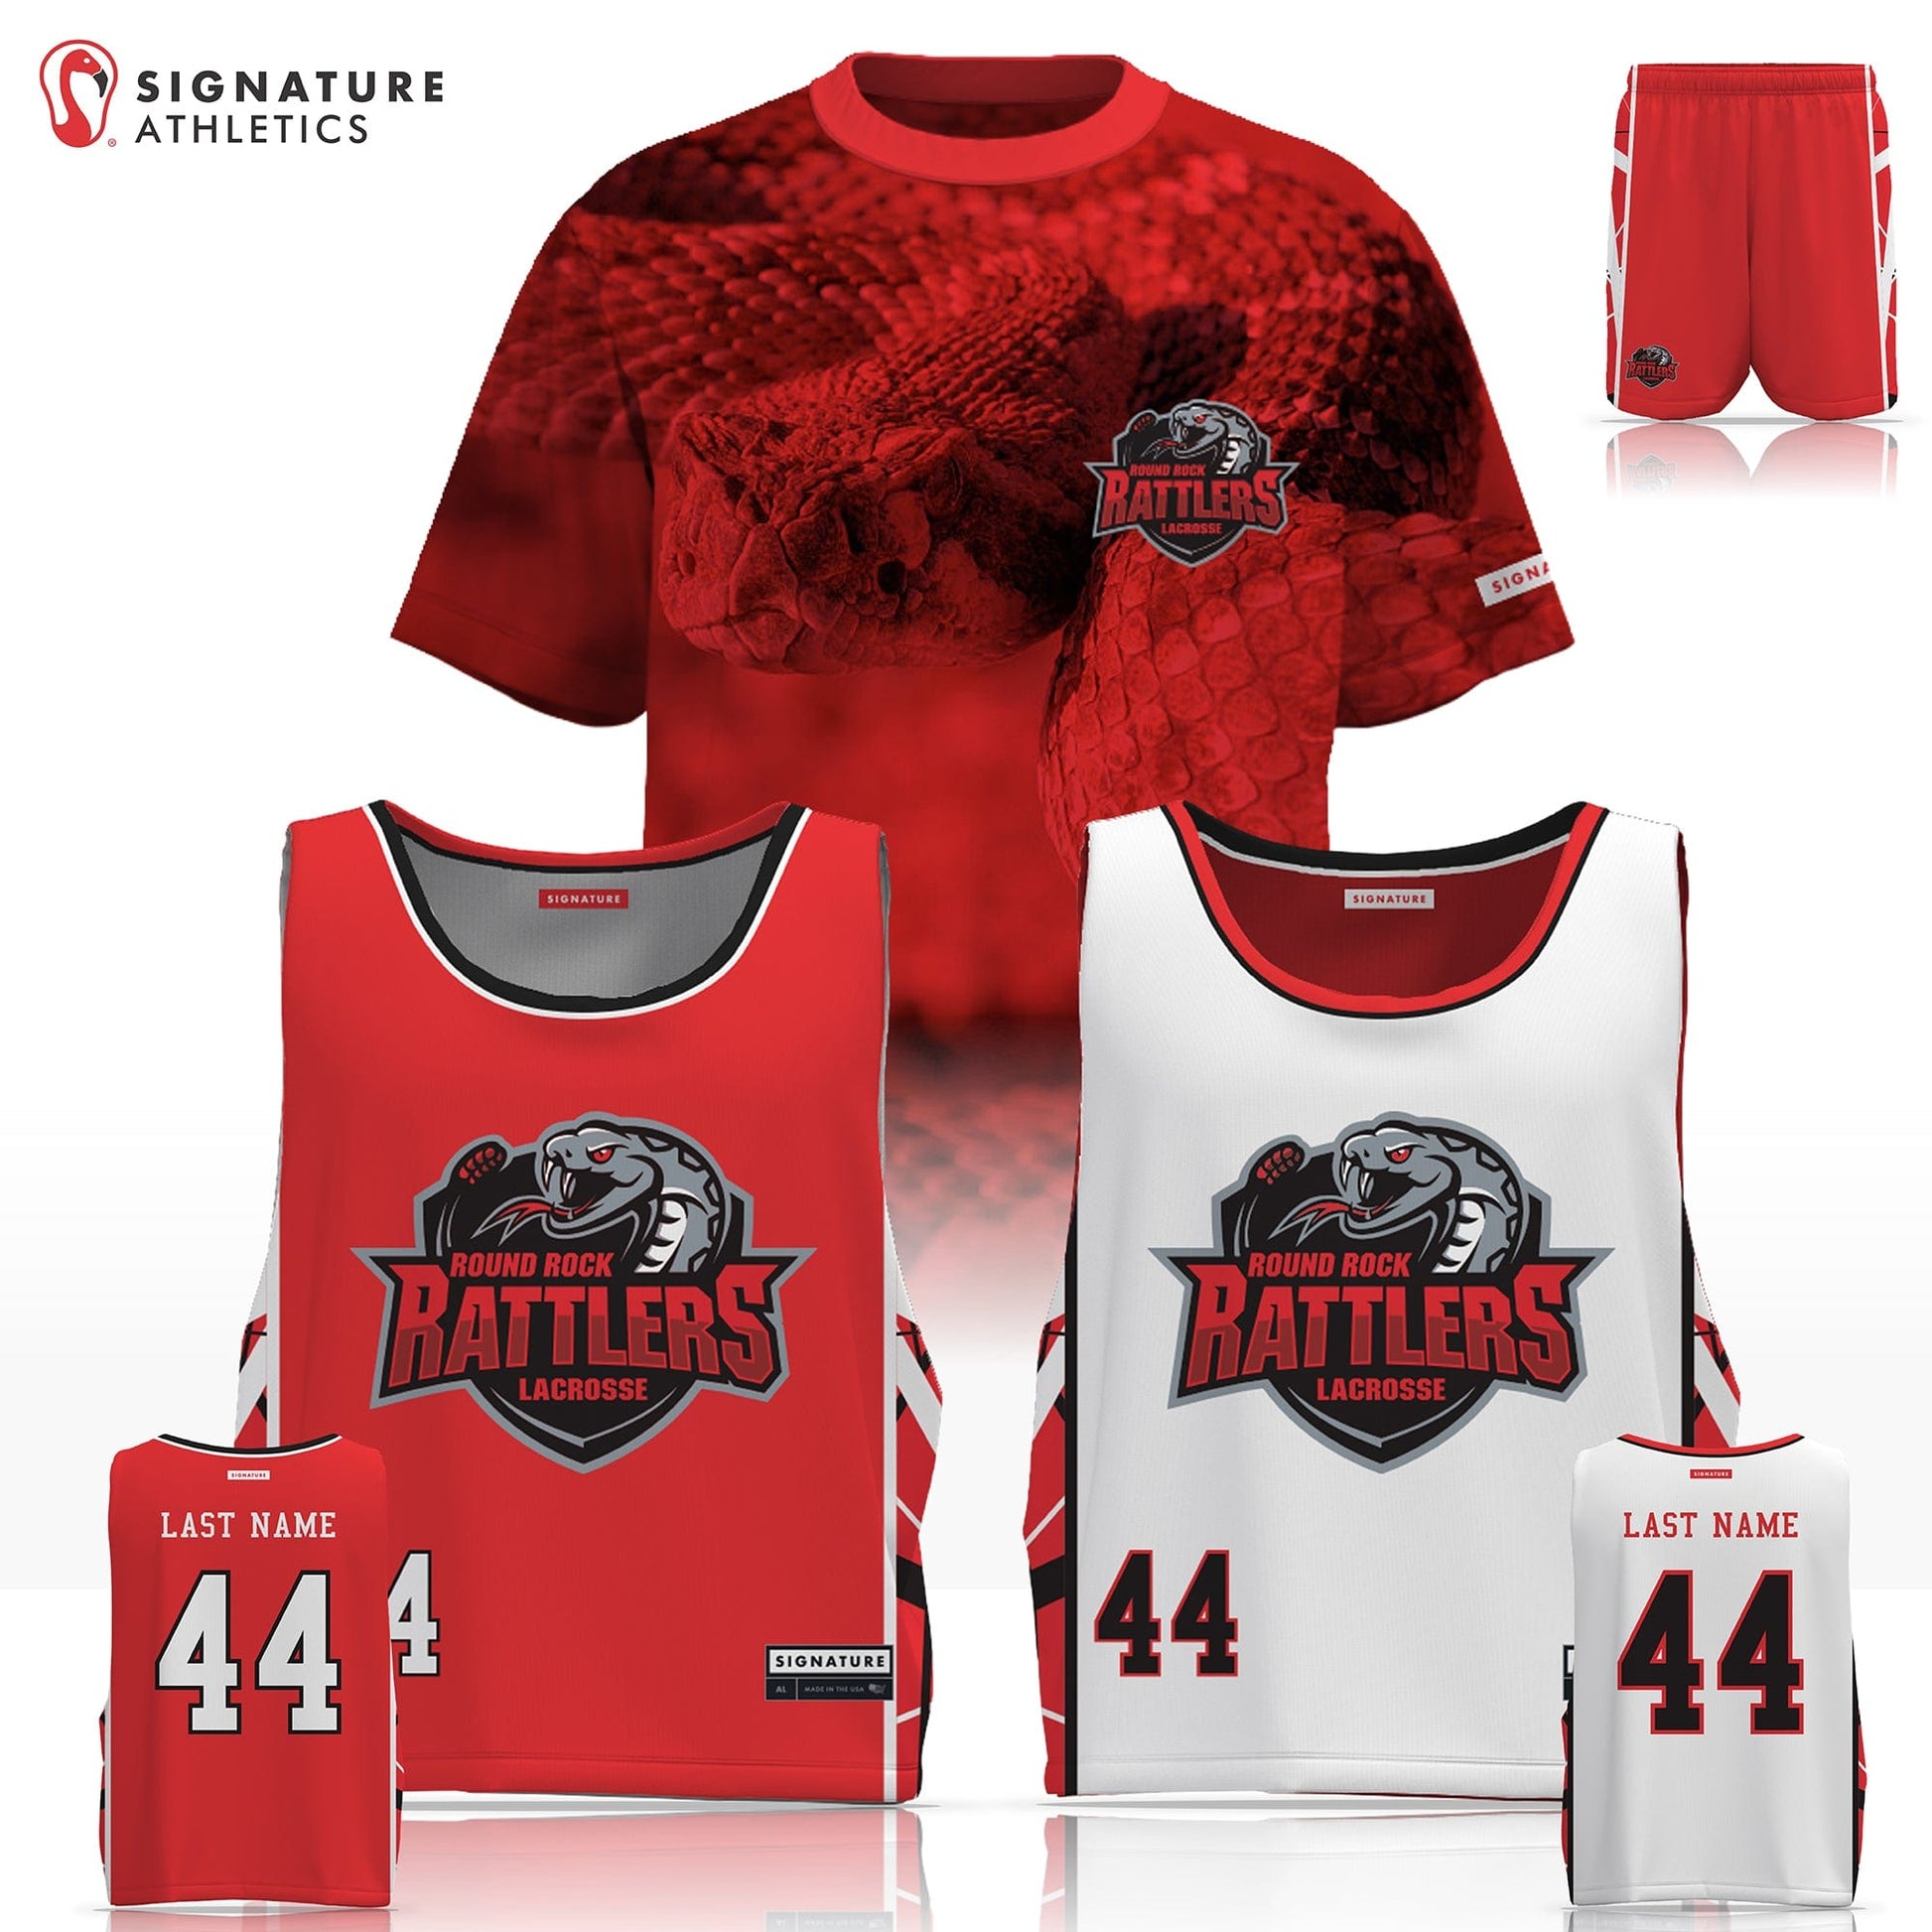 Round Rock Rattlers Men's 3 Piece Player Game Package Signature Lacrosse